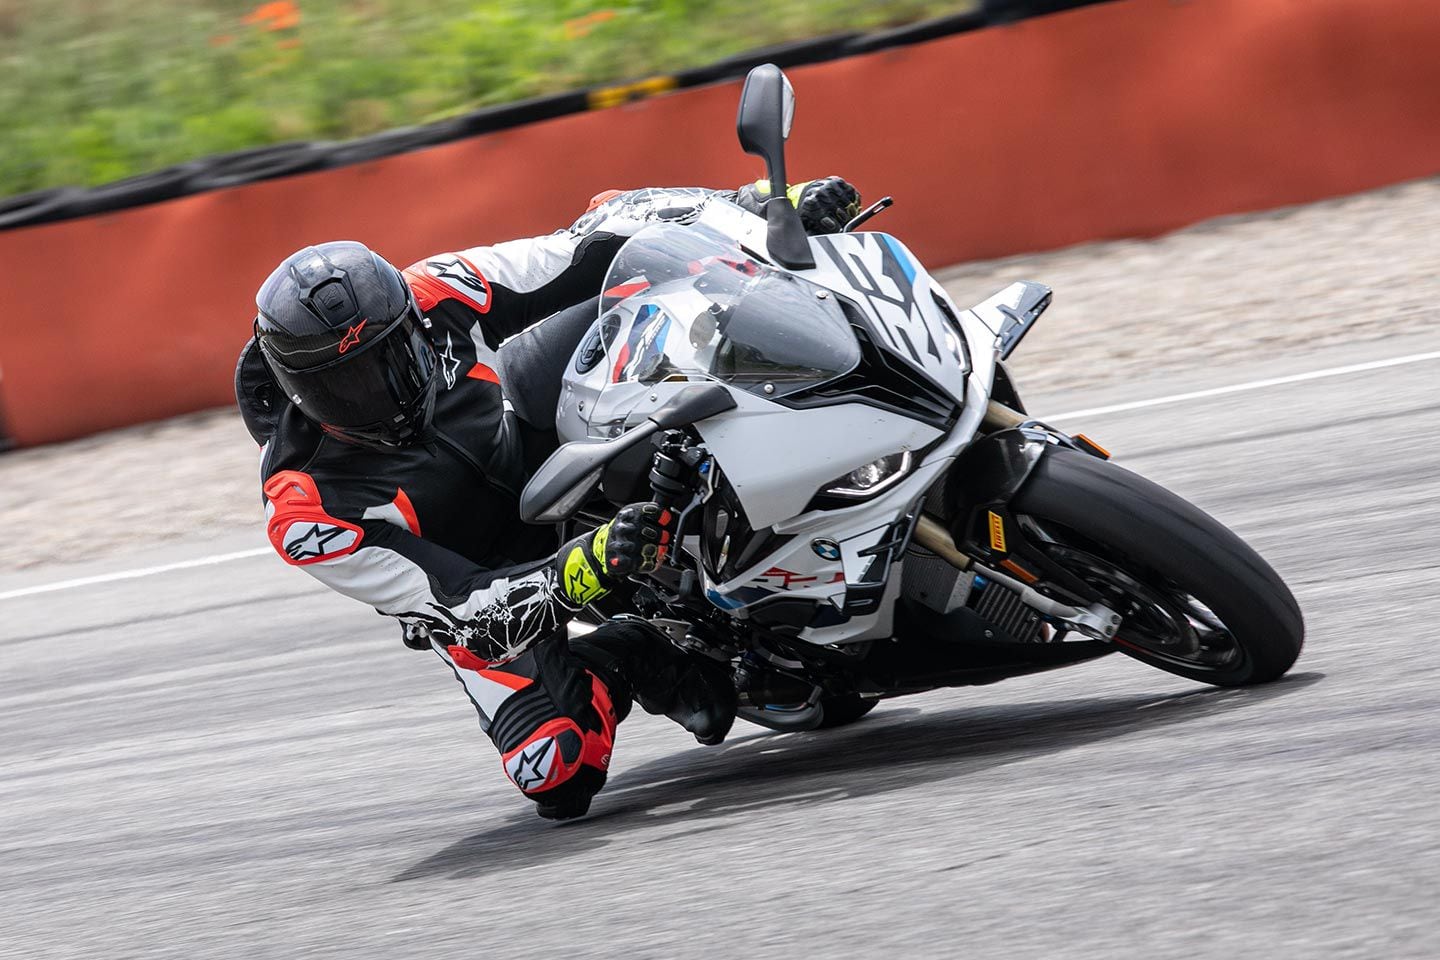 The combination of enhanced aerodynamics and large eyeport with reduced side line help the rider when off the bike and looking through a corner. Even in this fully exposed position and cornering at high speeds, there’s very little drag.